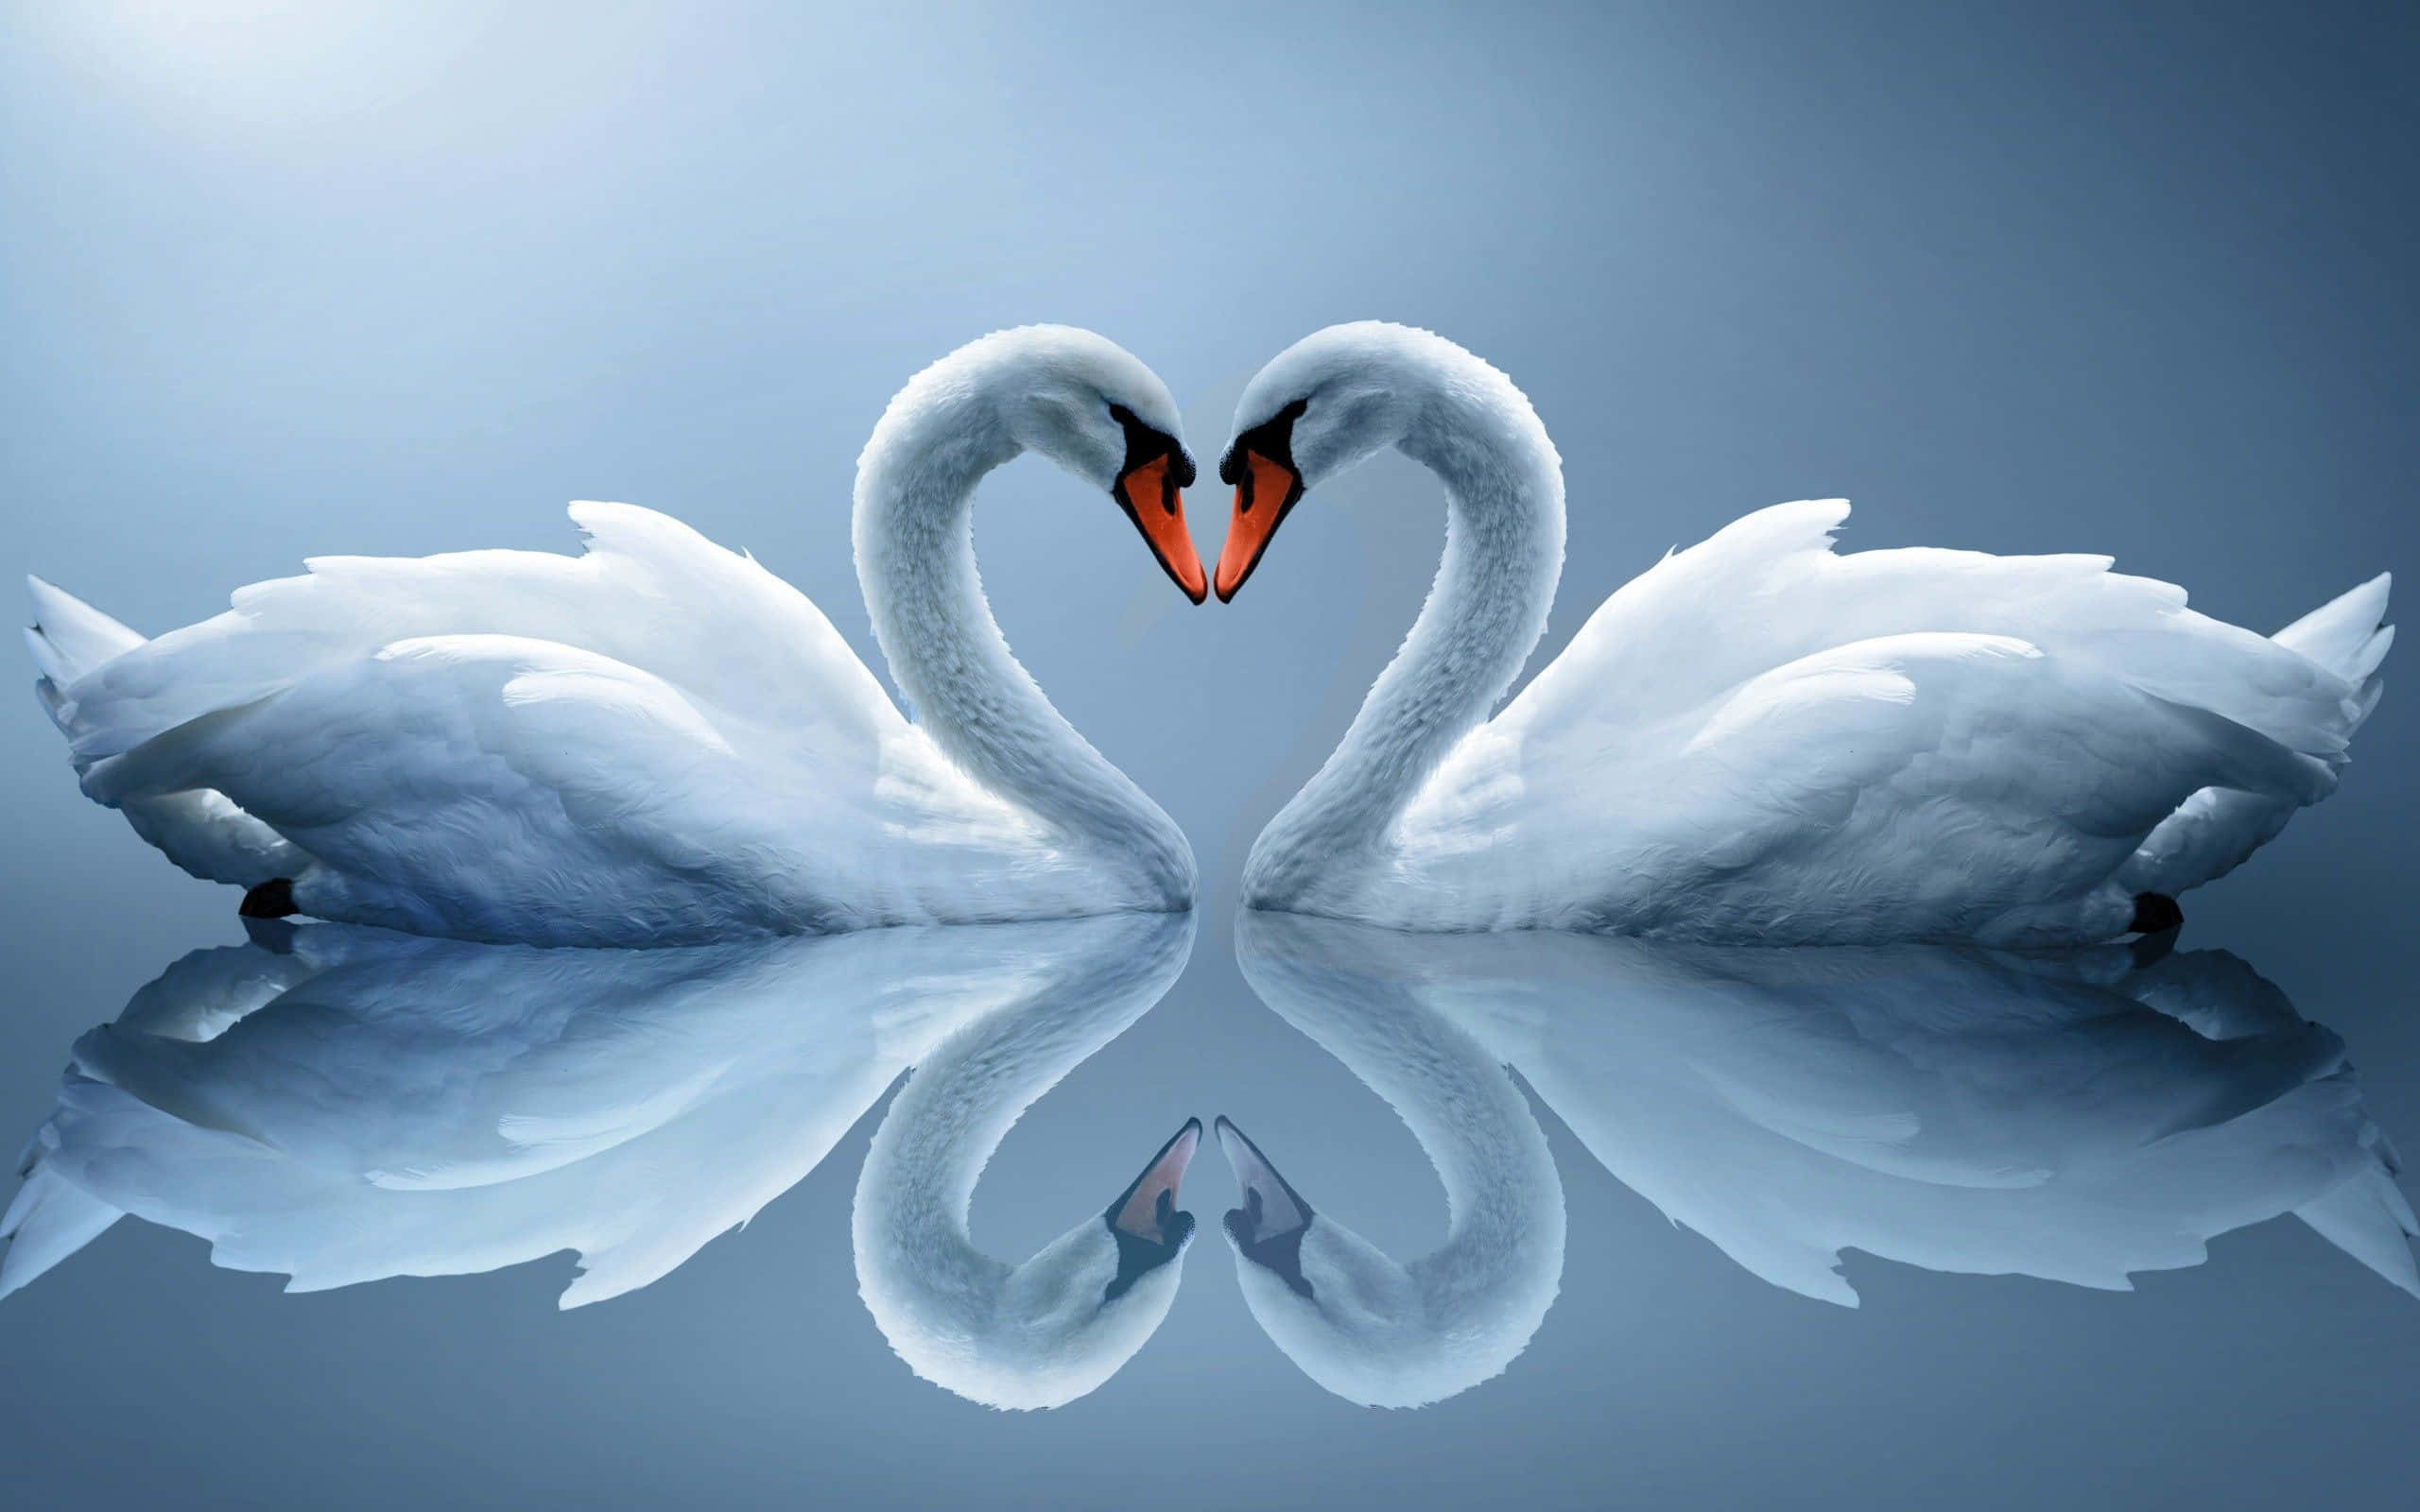 two swans making a heart shape in the water